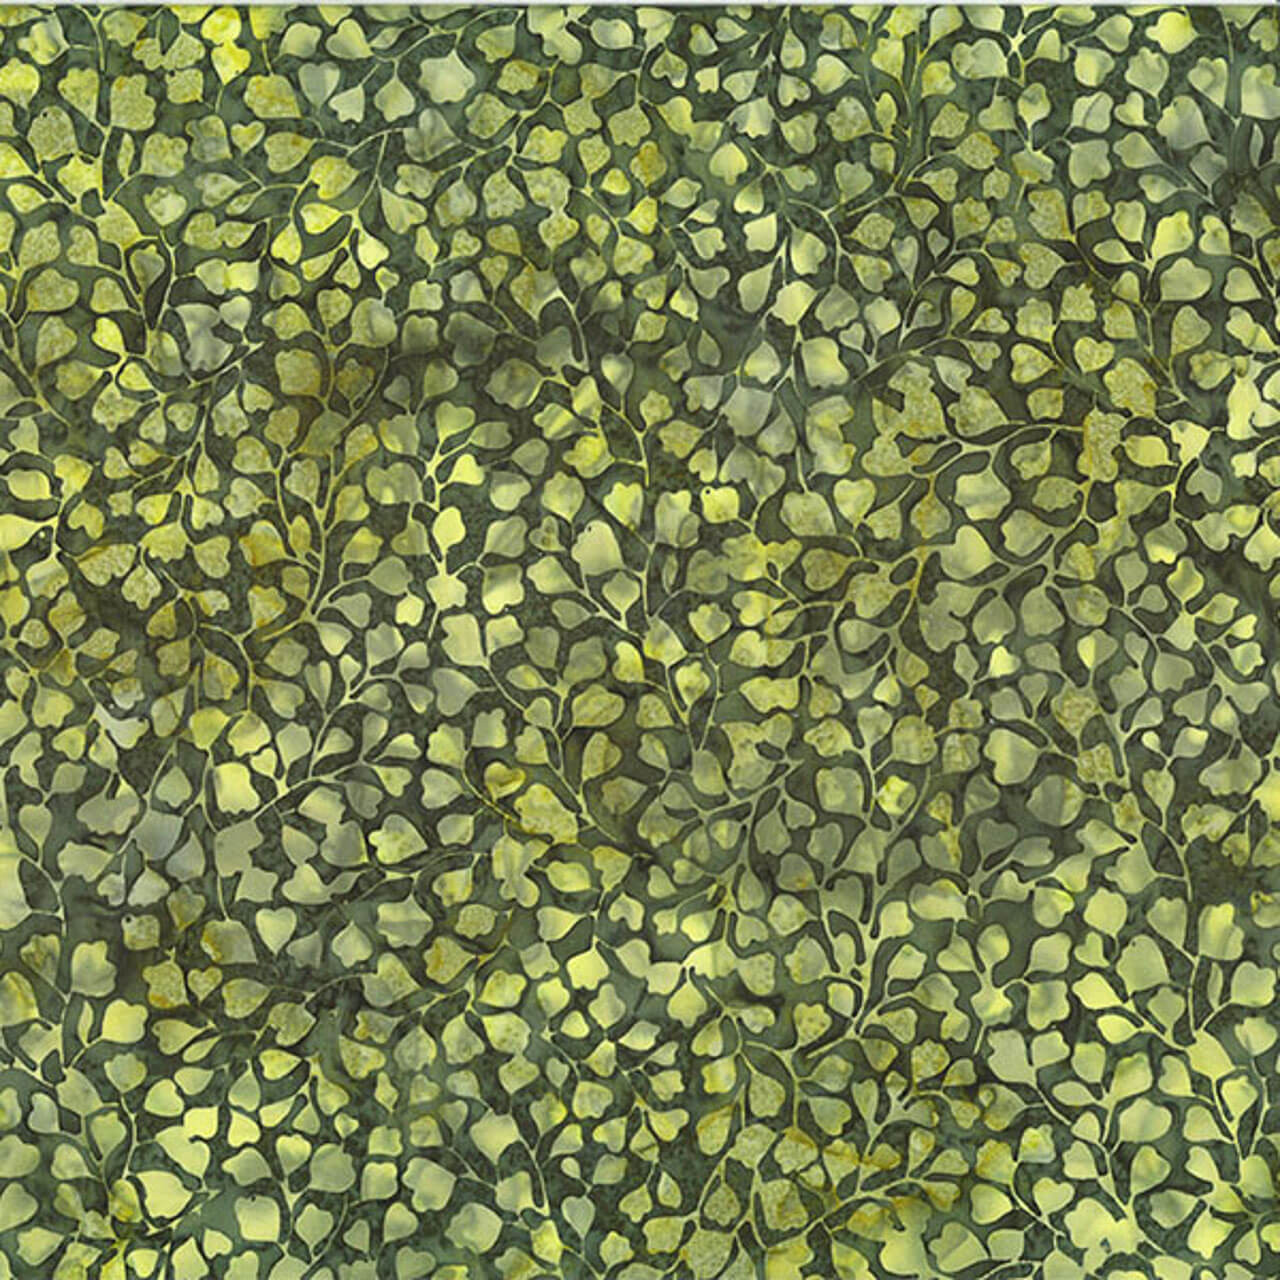 100% cotton batik fabric named Forest Fresco, featuring a variety of green shades in a leafy pattern, from Hoffman Fabrics' Bali Handpaints Batiks series.